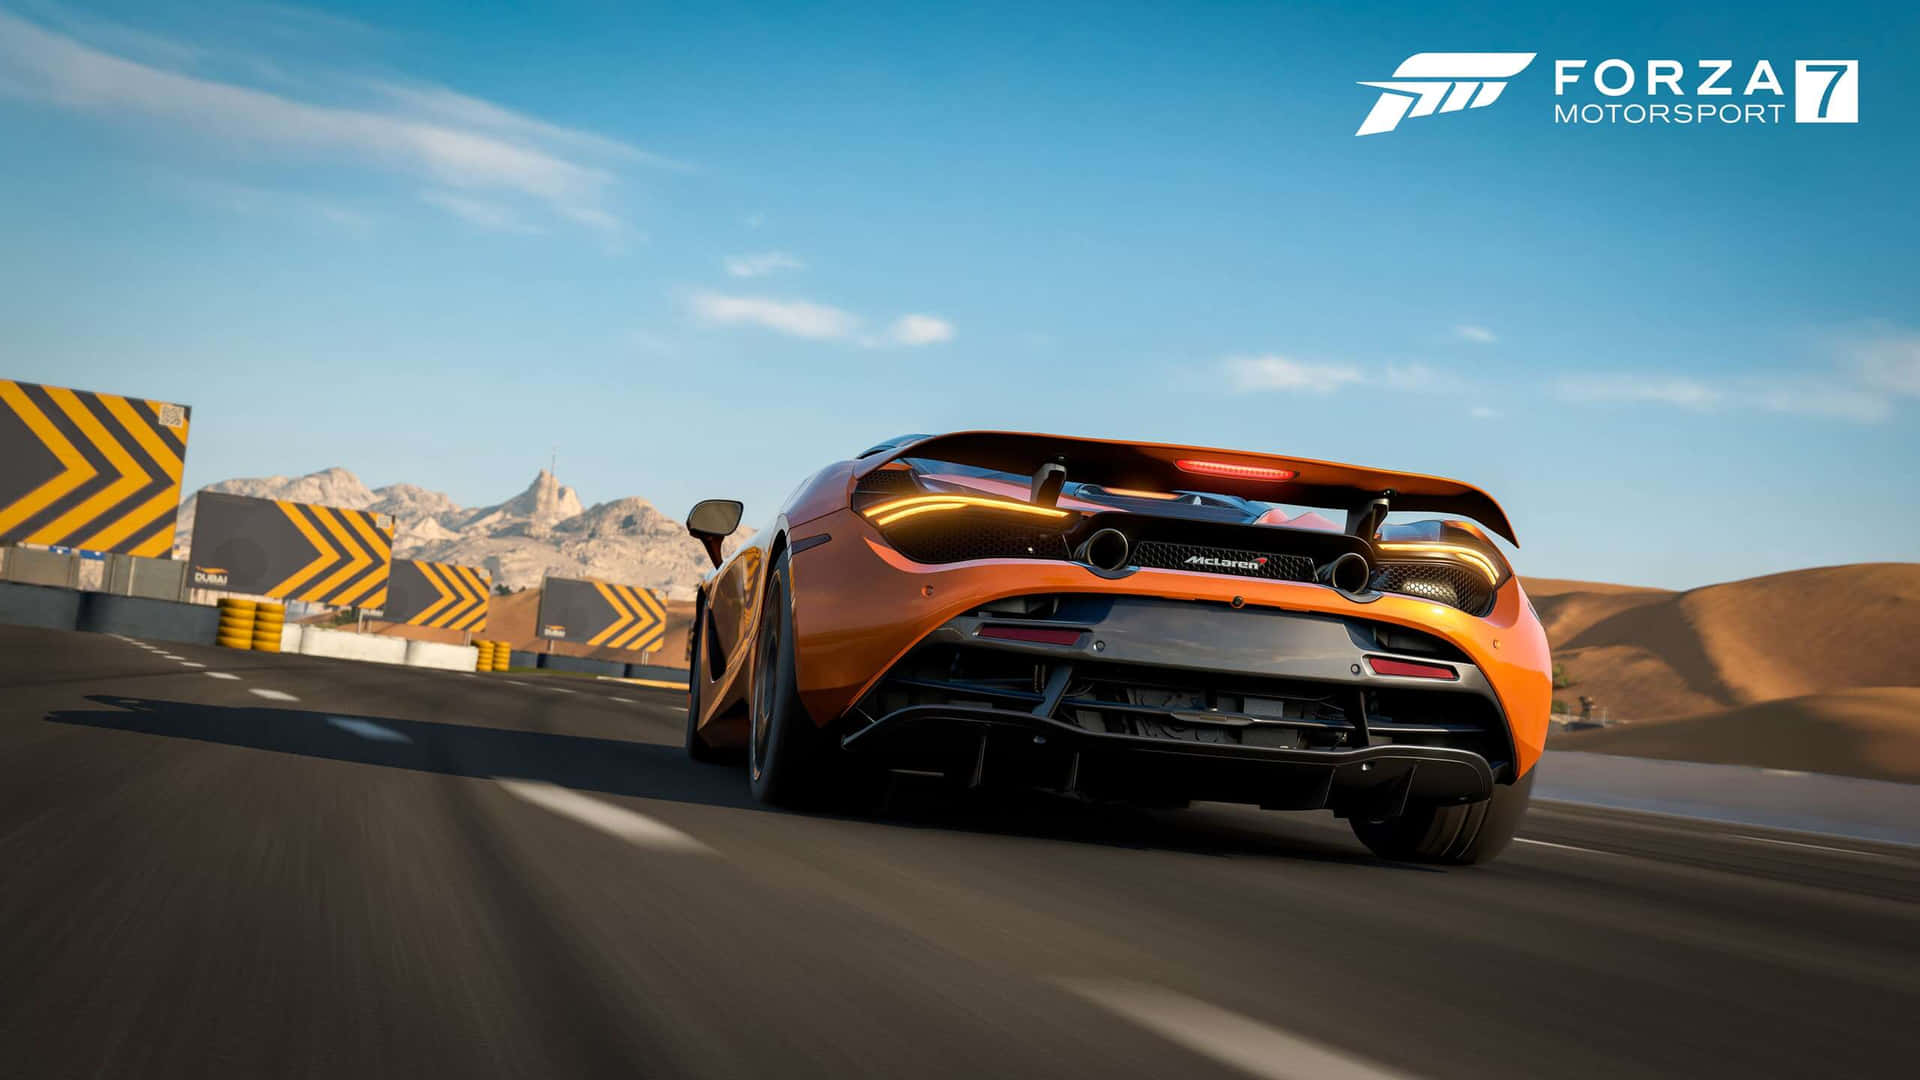 Take a Ride in Forza Motorsport 7 in Stunning 1440p